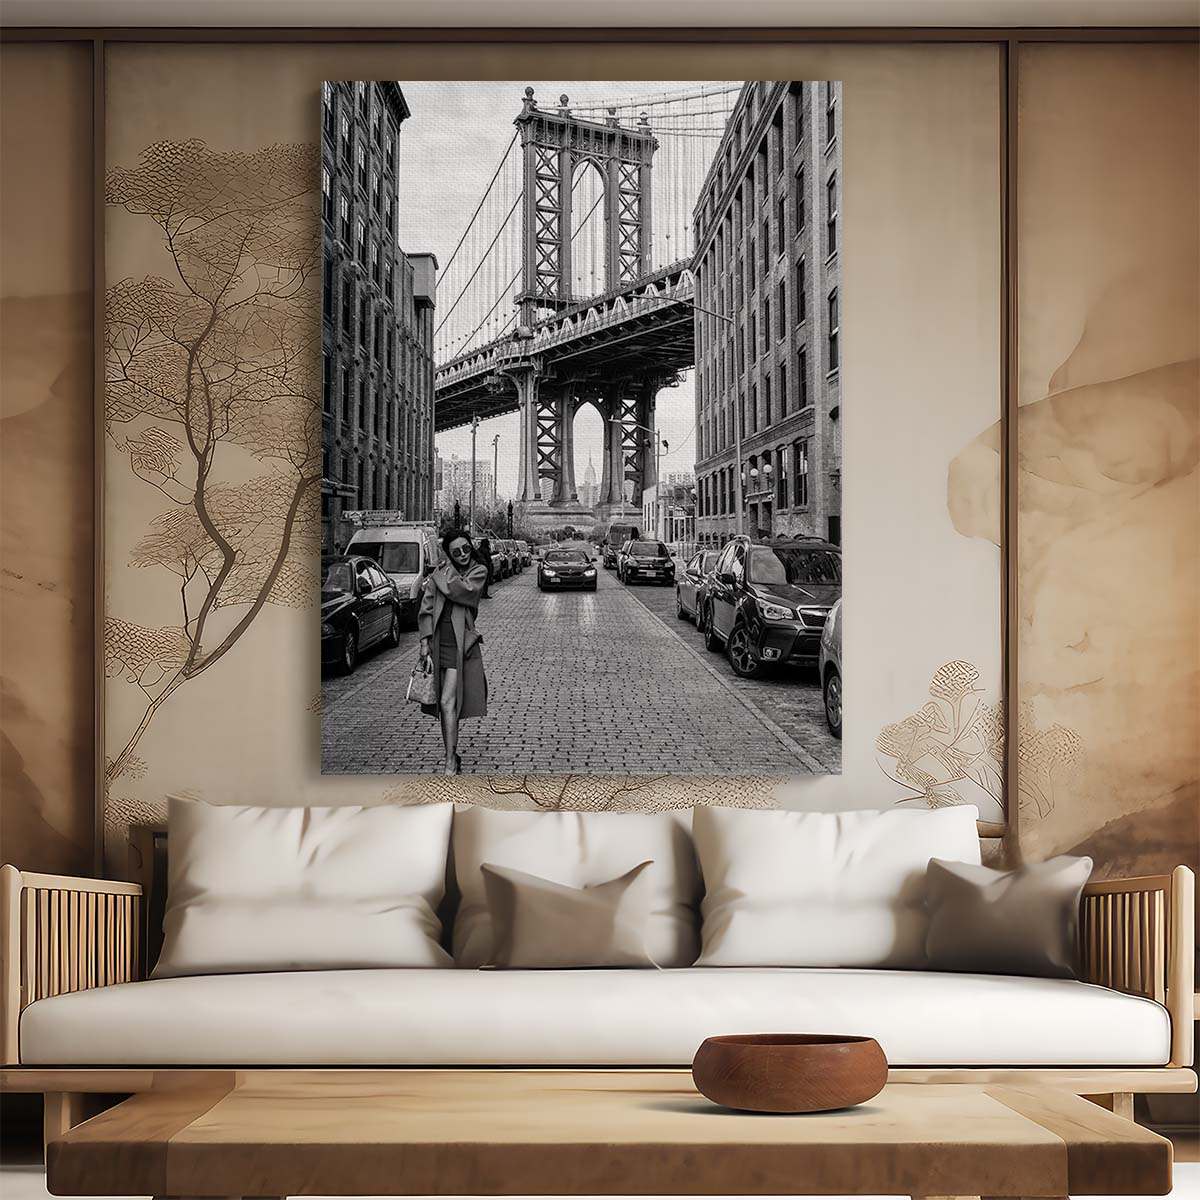 Brooklyn BW Photography Woman Walking by Iconic Manhattan Bridge by Luxuriance Designs, made in USA